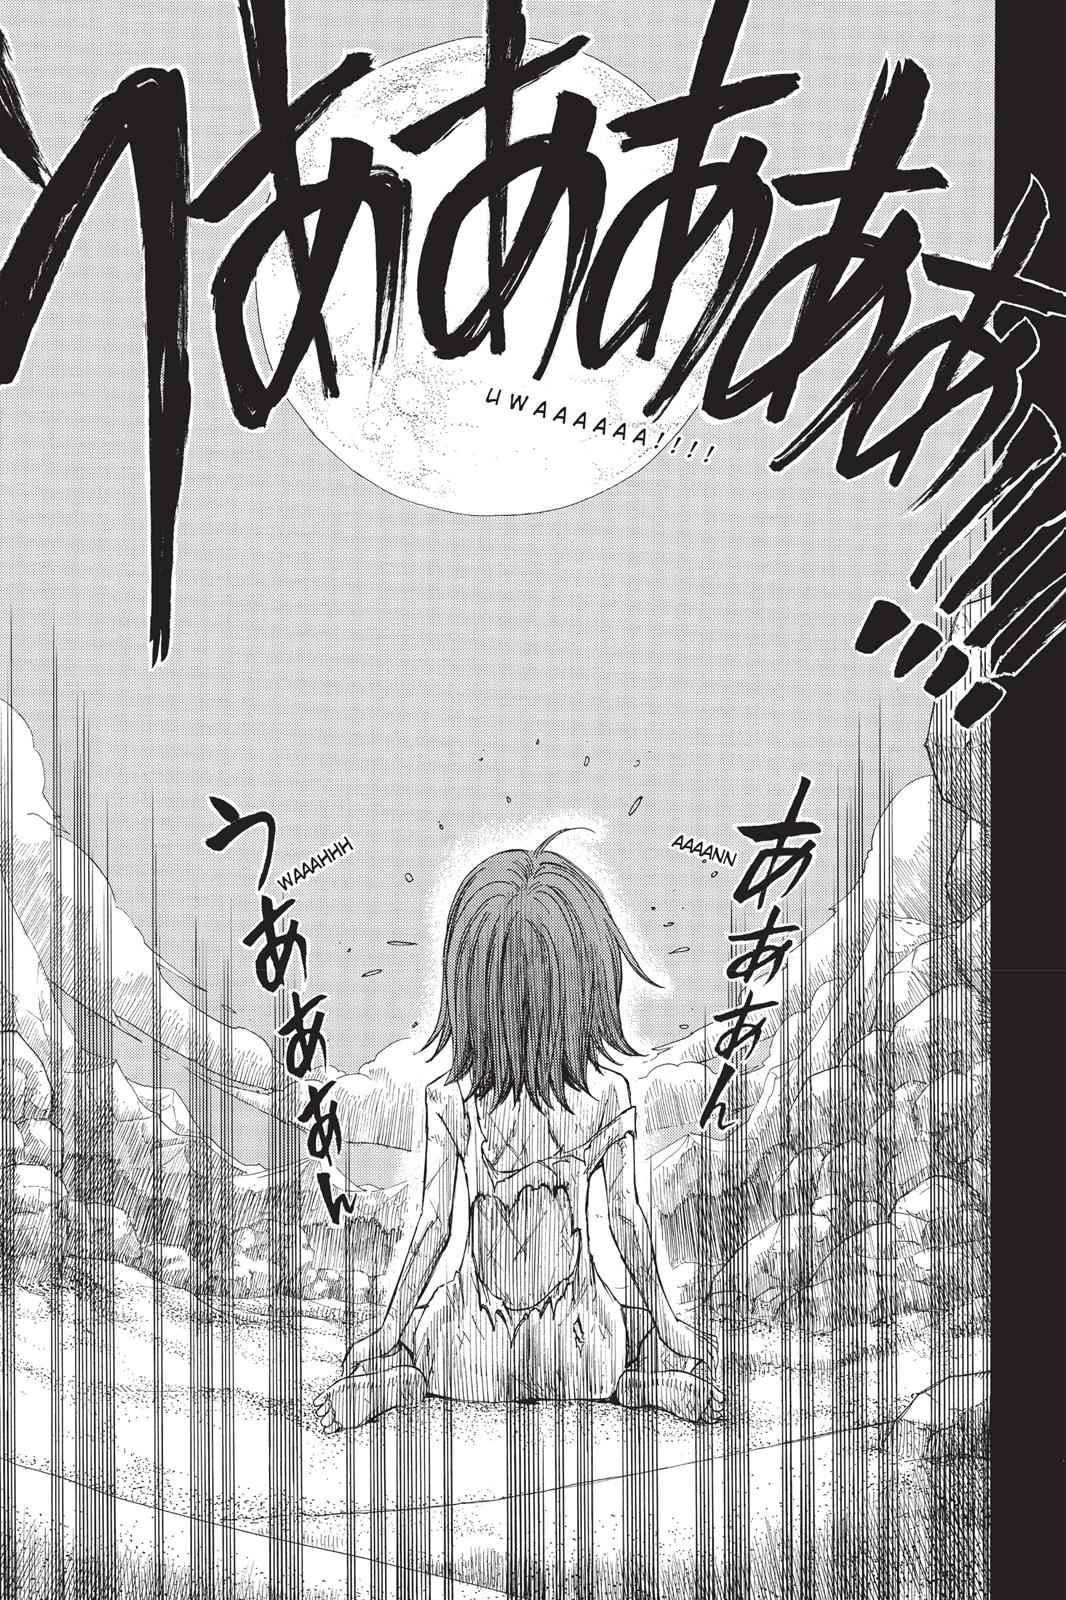  Chapter 82 image 019